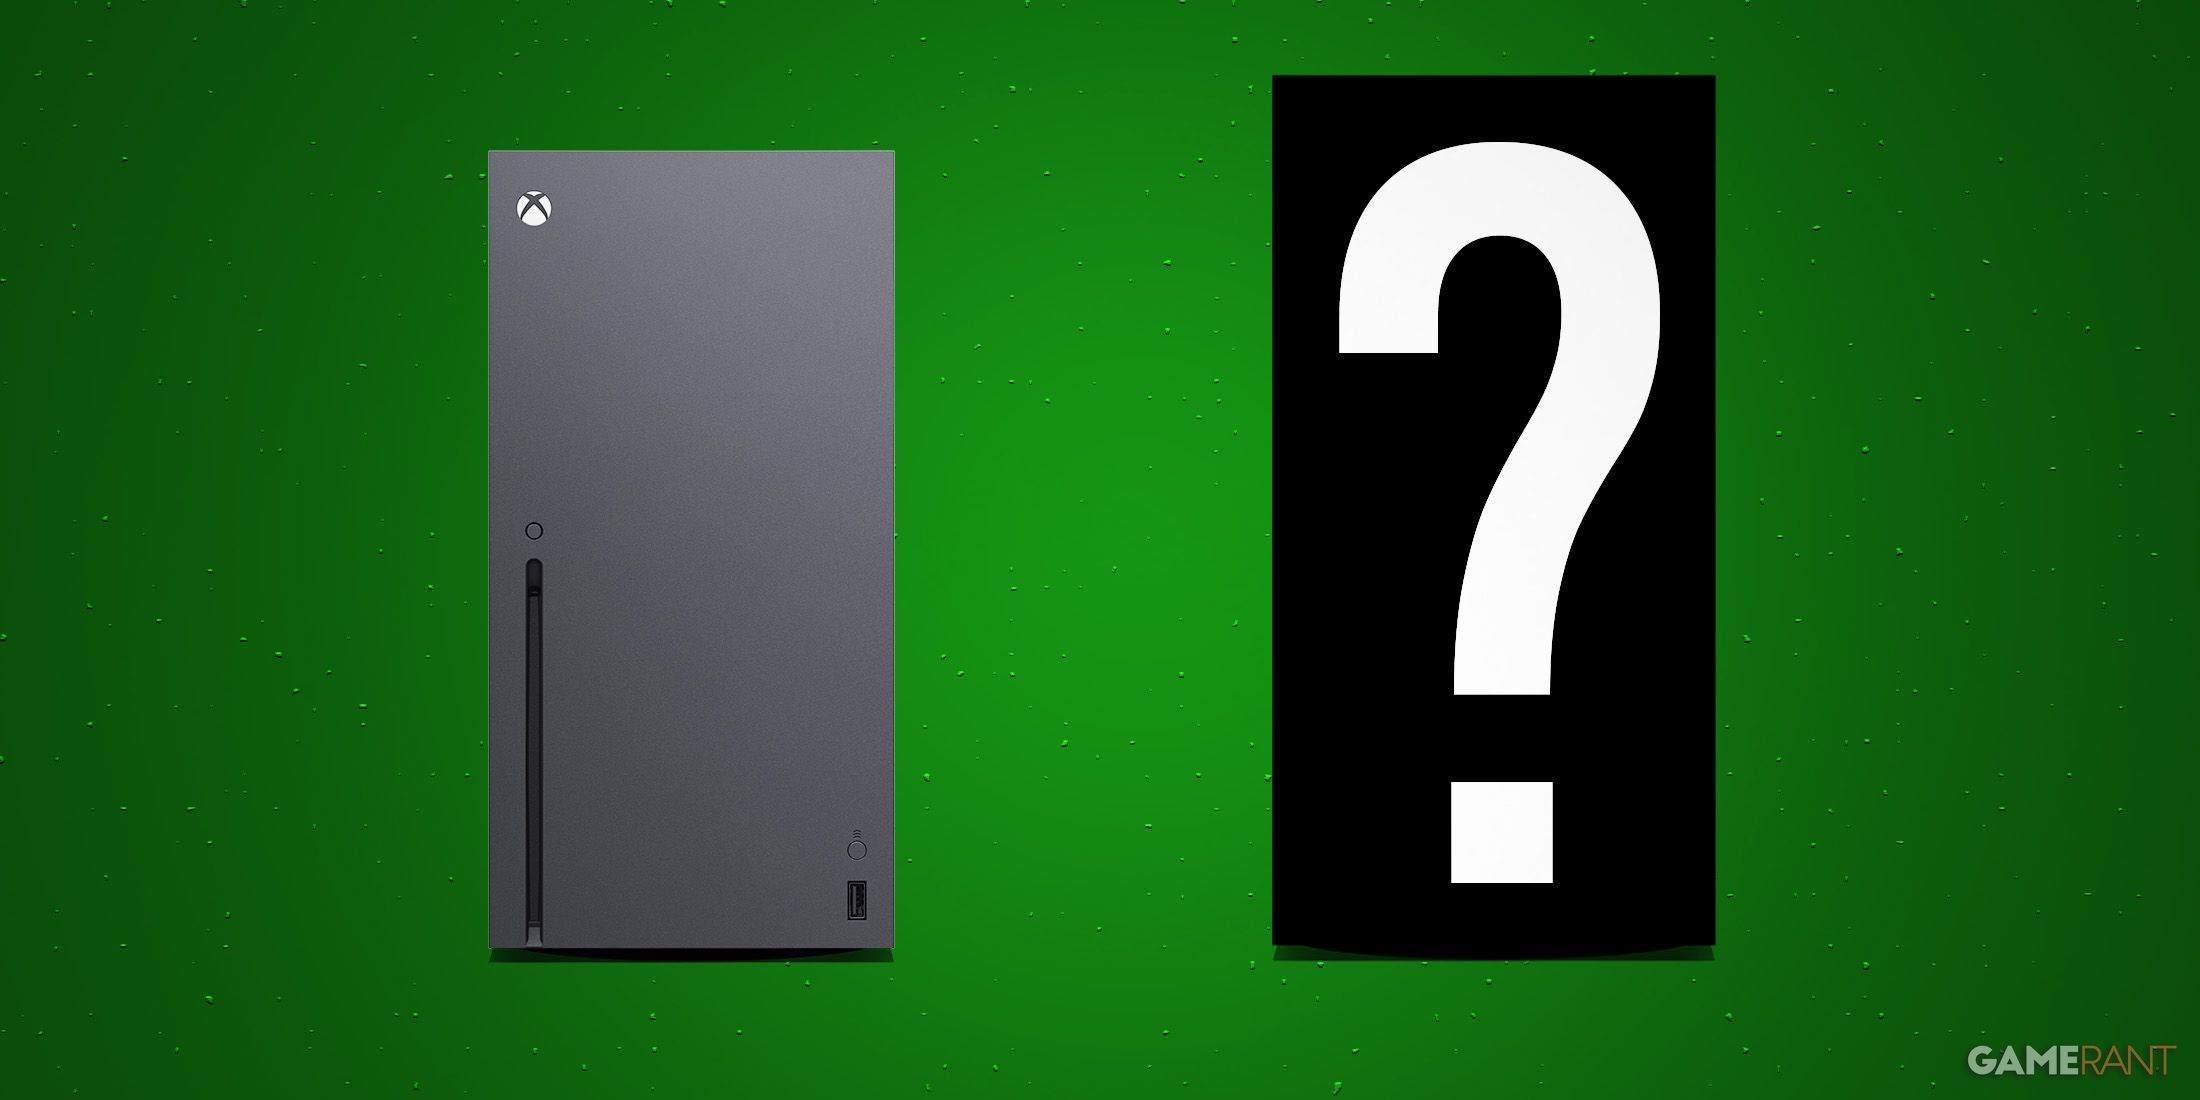 Xbox Series X next to larger console silhouette with white question mark on dark green background